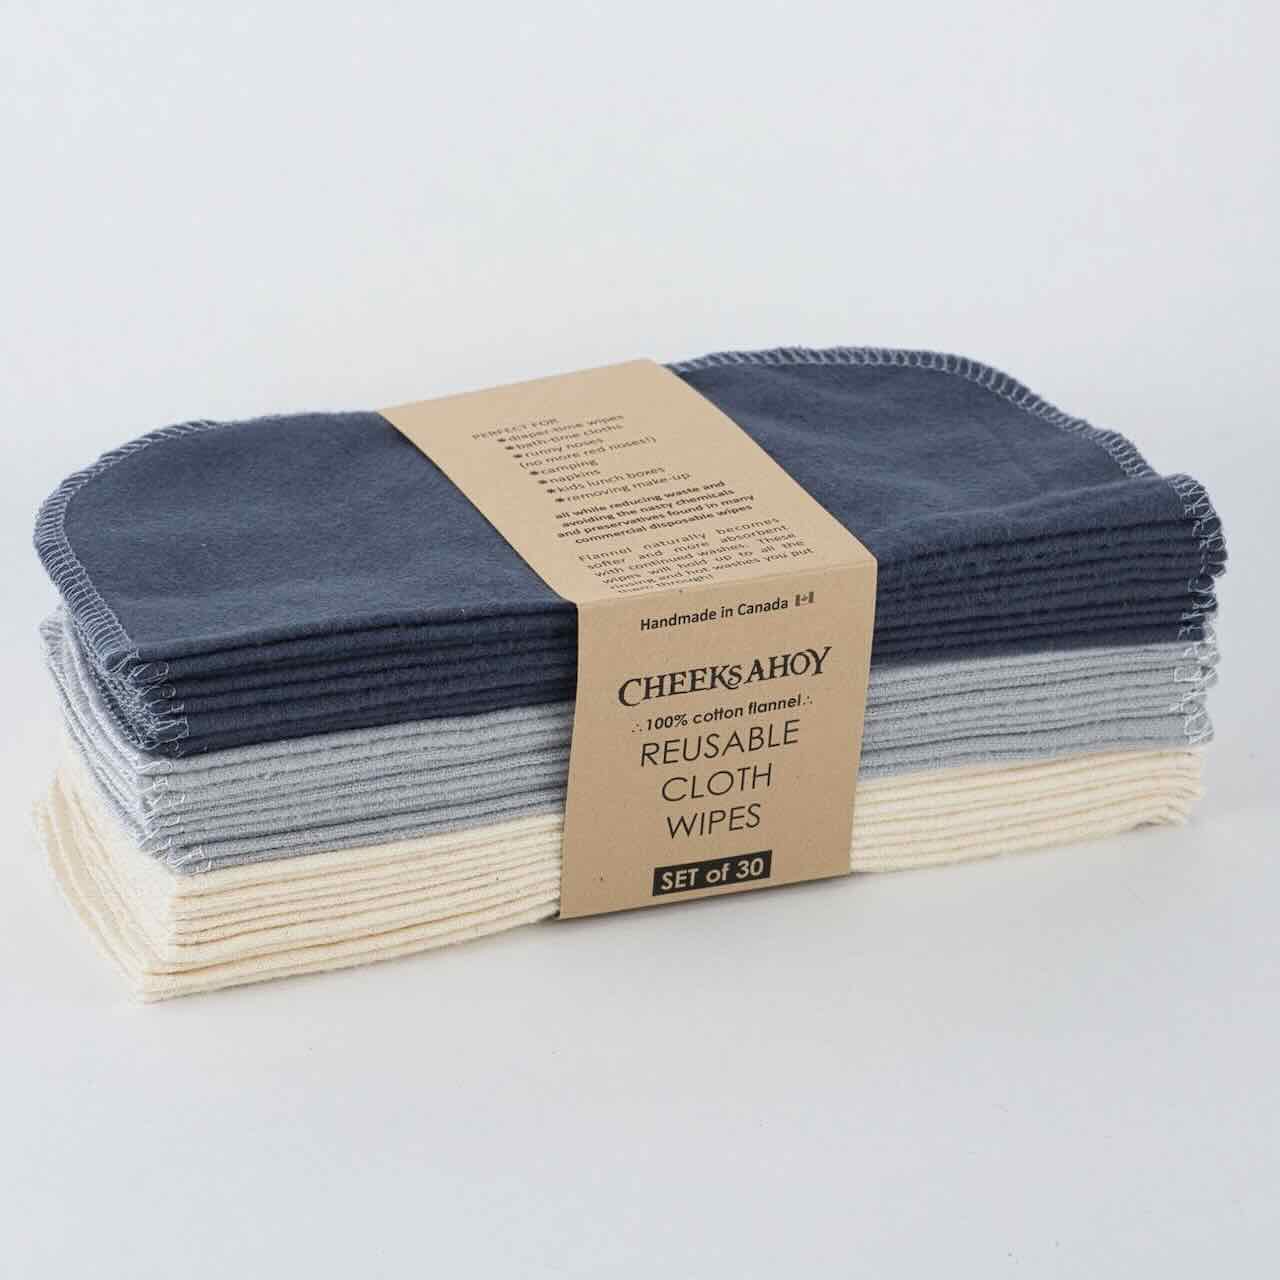 Warm charcoal patterned cheeks ahoy cloth wipes, set of 30 in its paper sleeve packaging, in a white background drop.